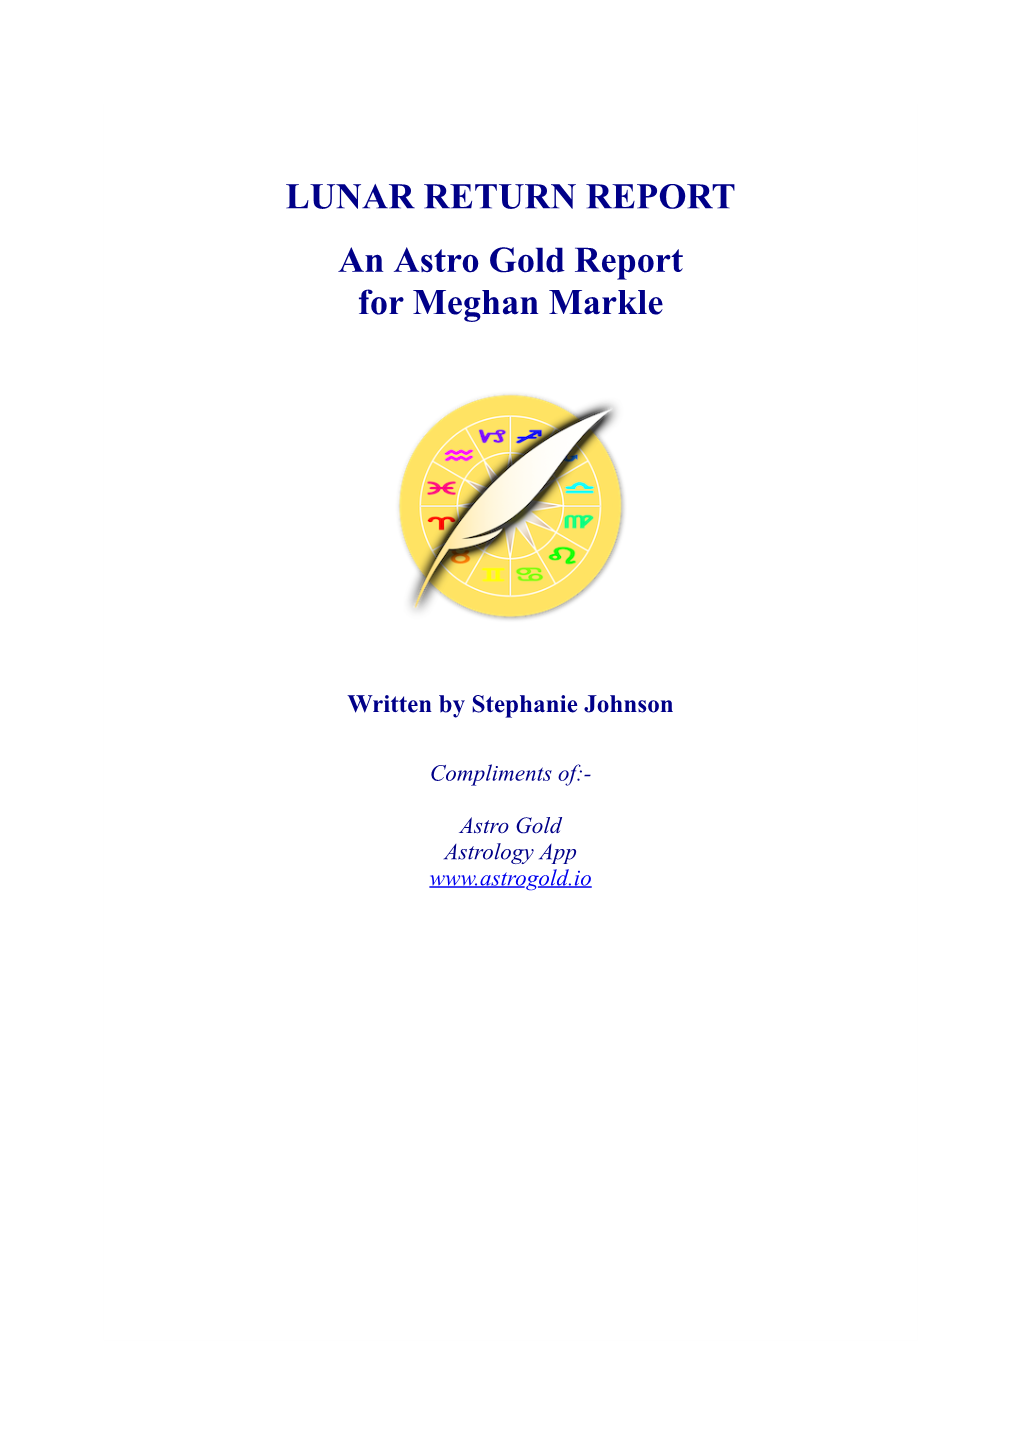 LUNAR RETURN REPORT an Astro Gold Report for Meghan Markle